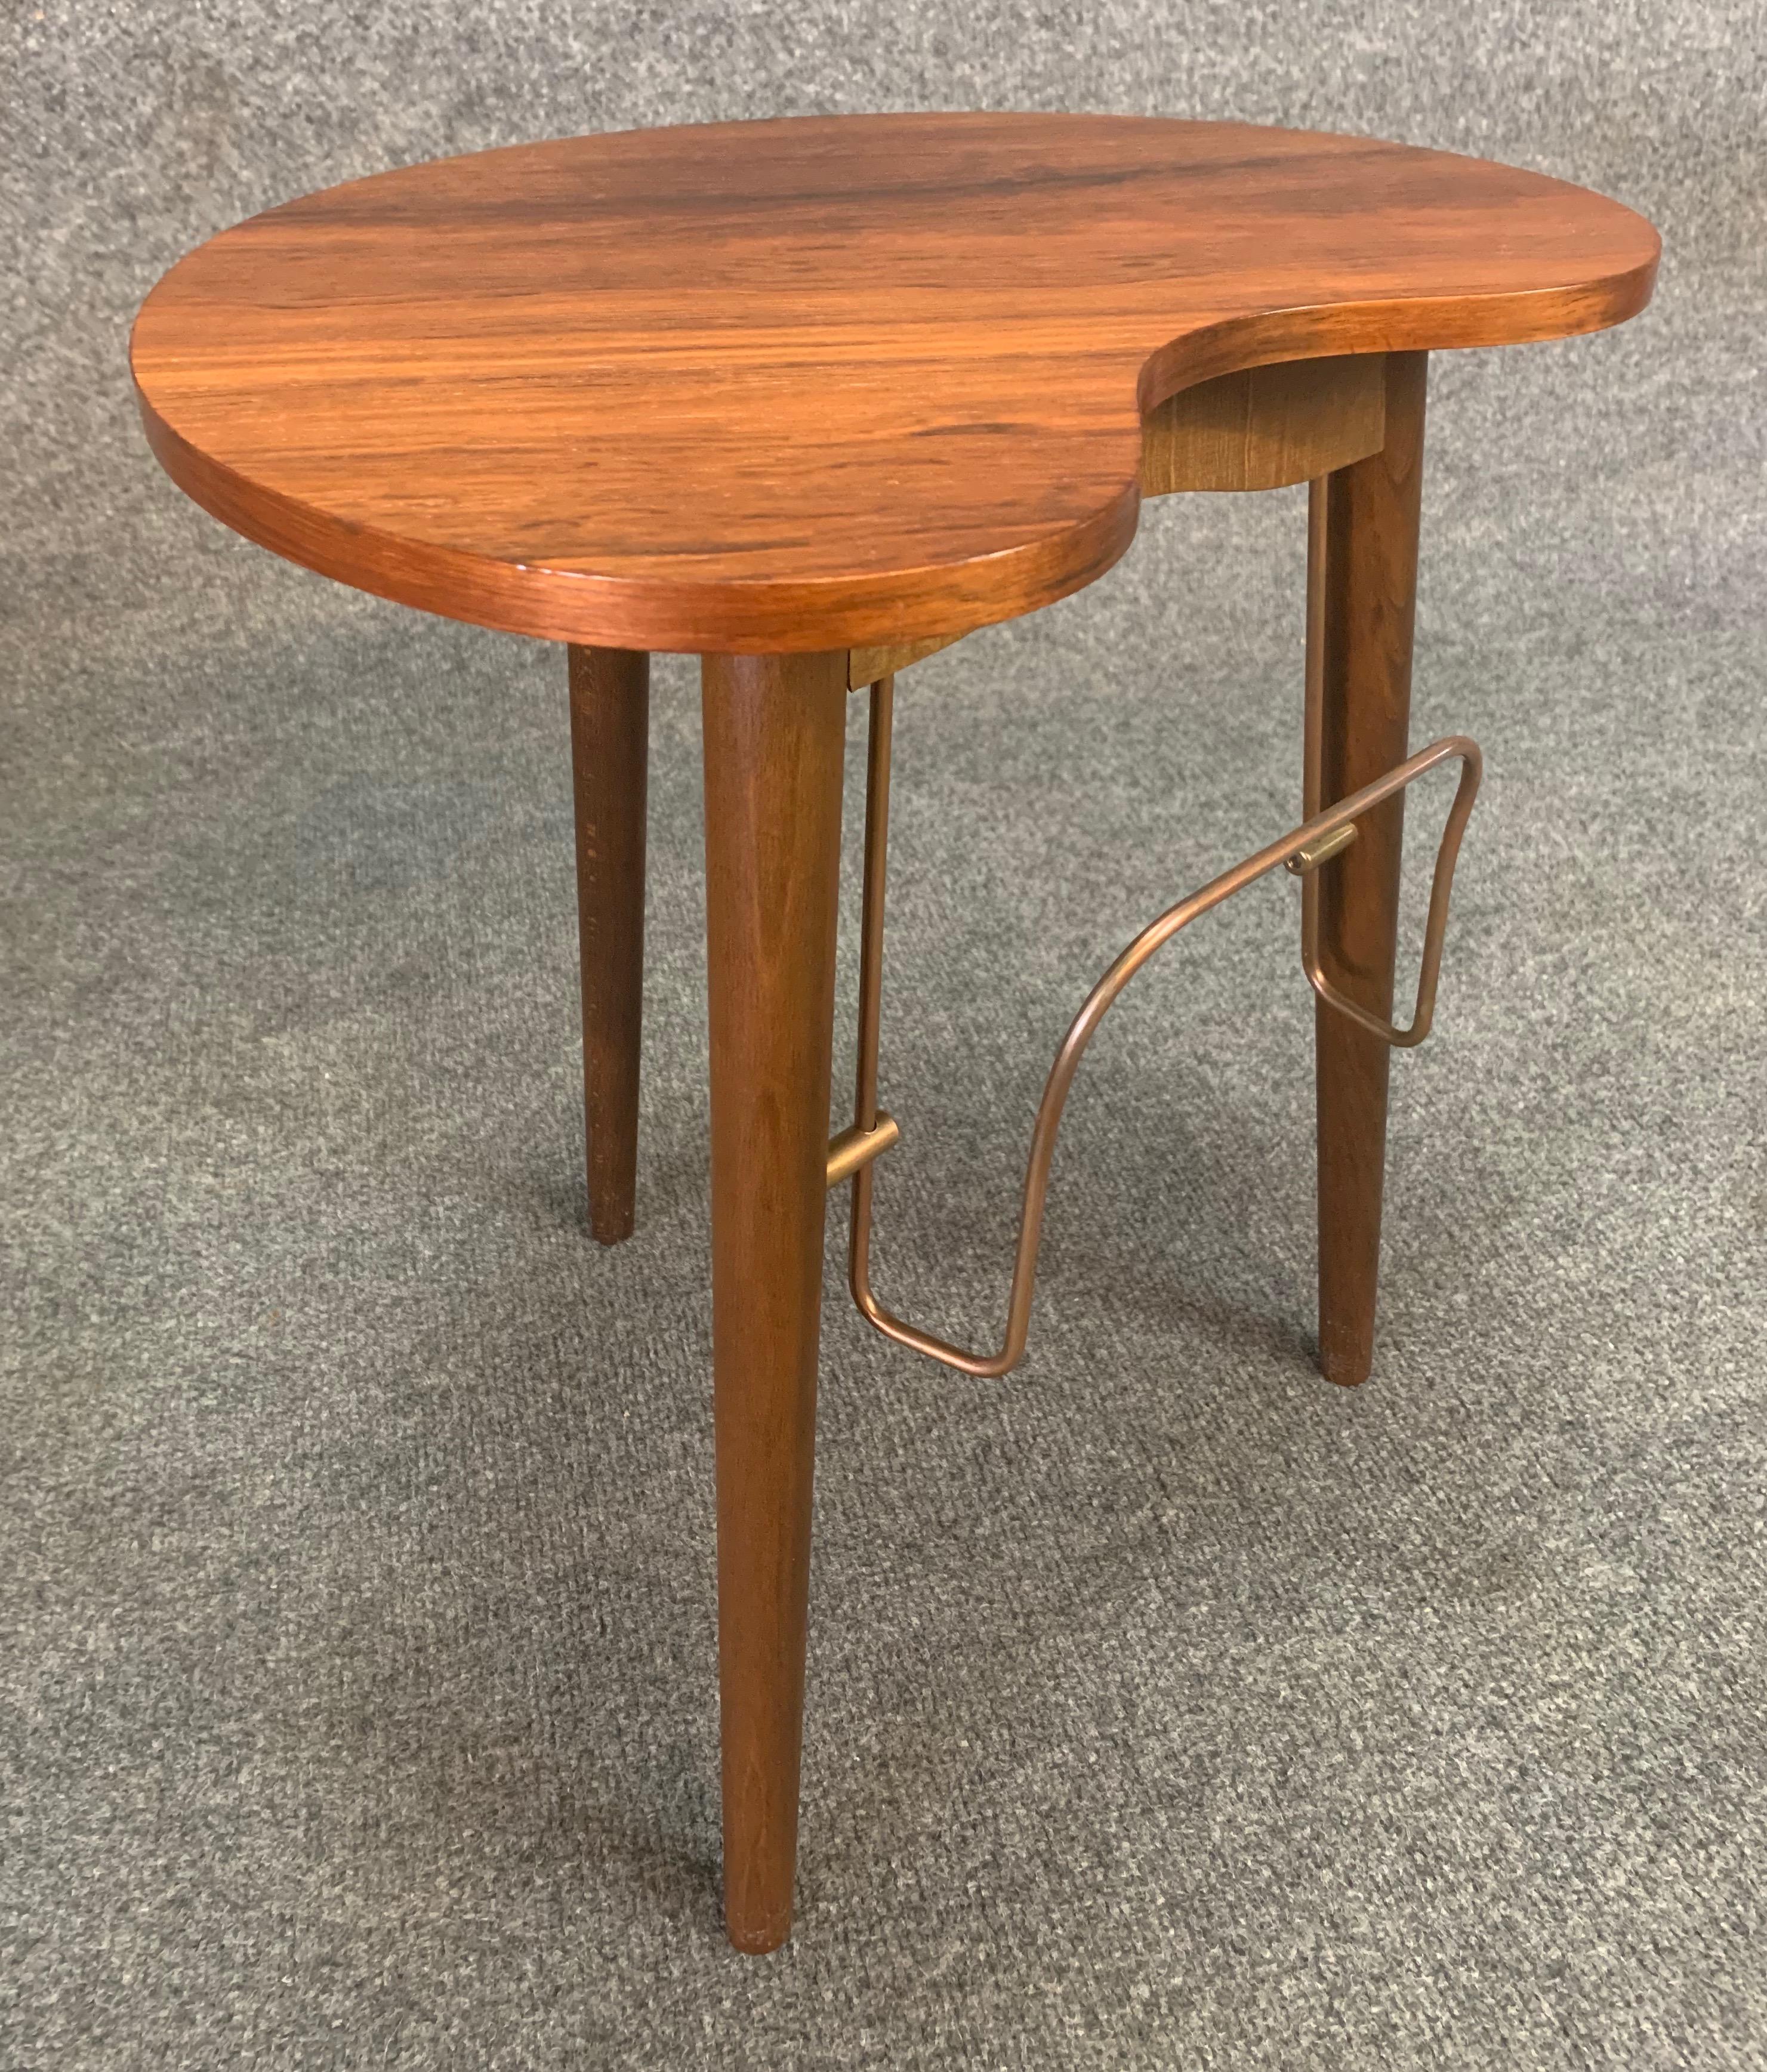 Mid-20th Century Vintage Danish Mid-Century Modern Rosewood Side Table by Gorm Mobler